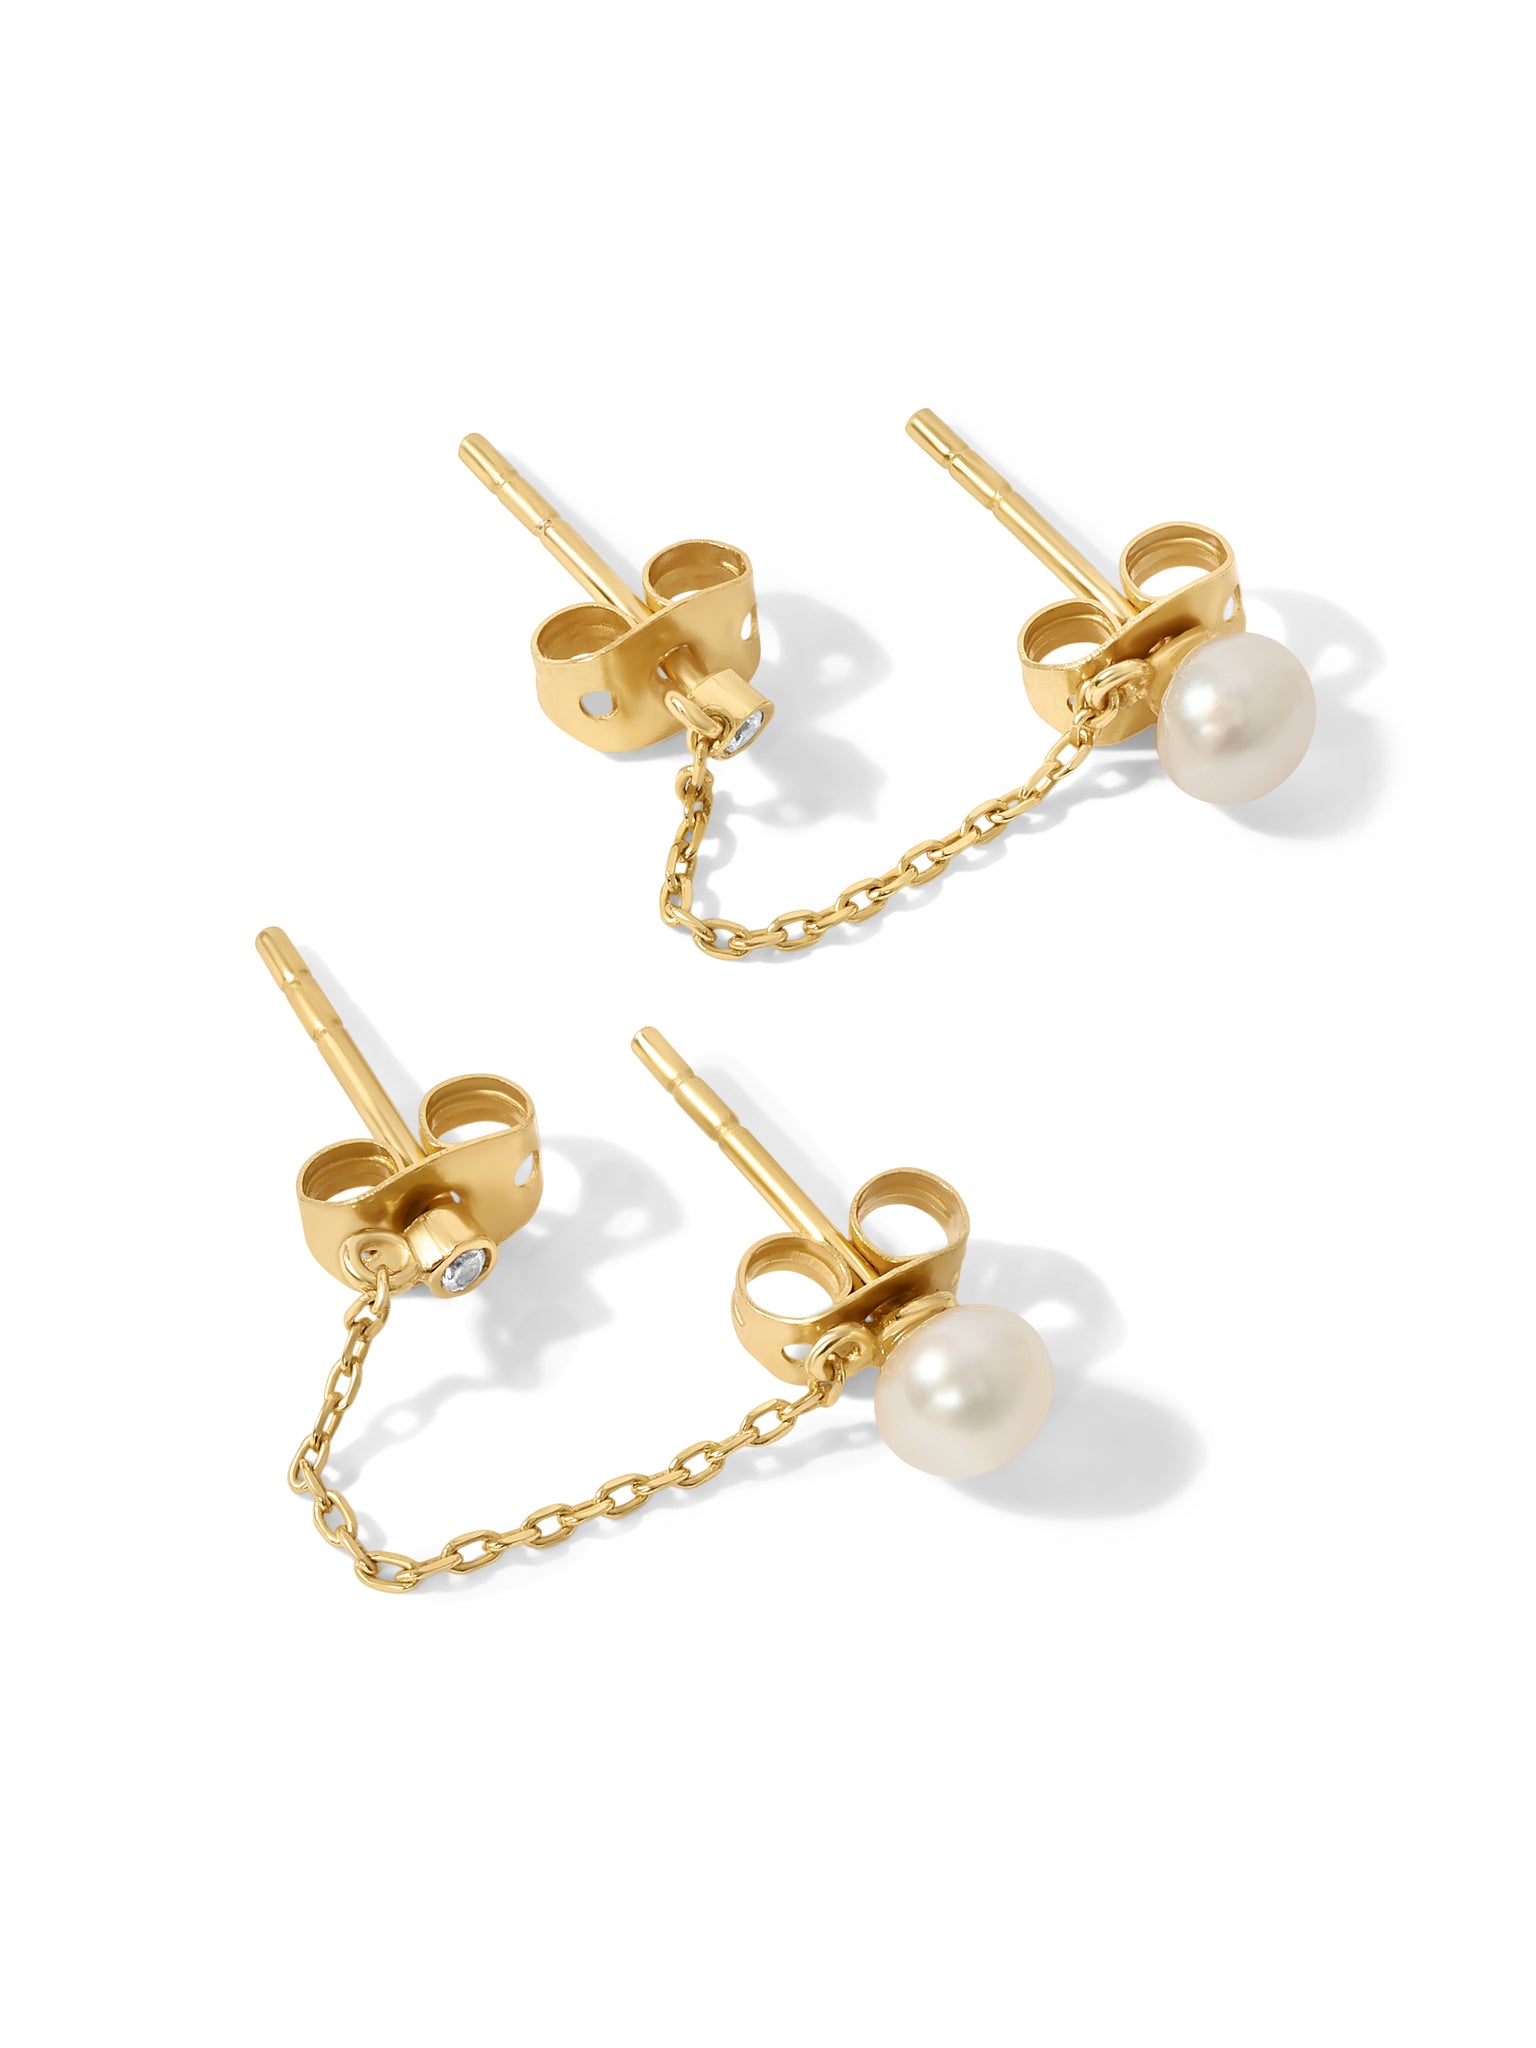 The Baby Pearl Double Earrings